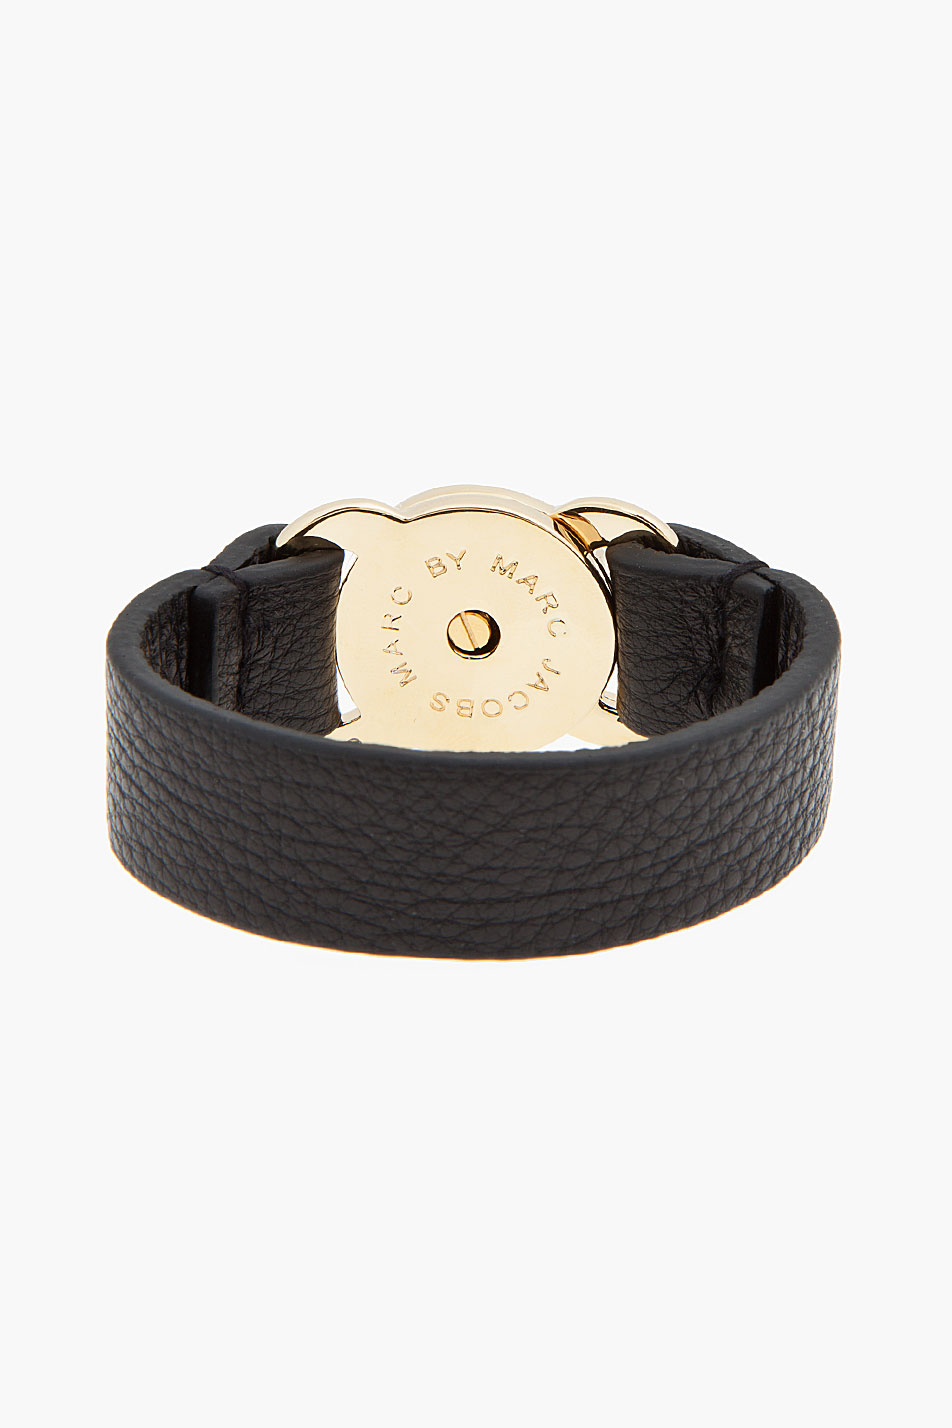 Lyst - Marc by marc jacobs Leather Large Turnlock Bracelet in Metallic